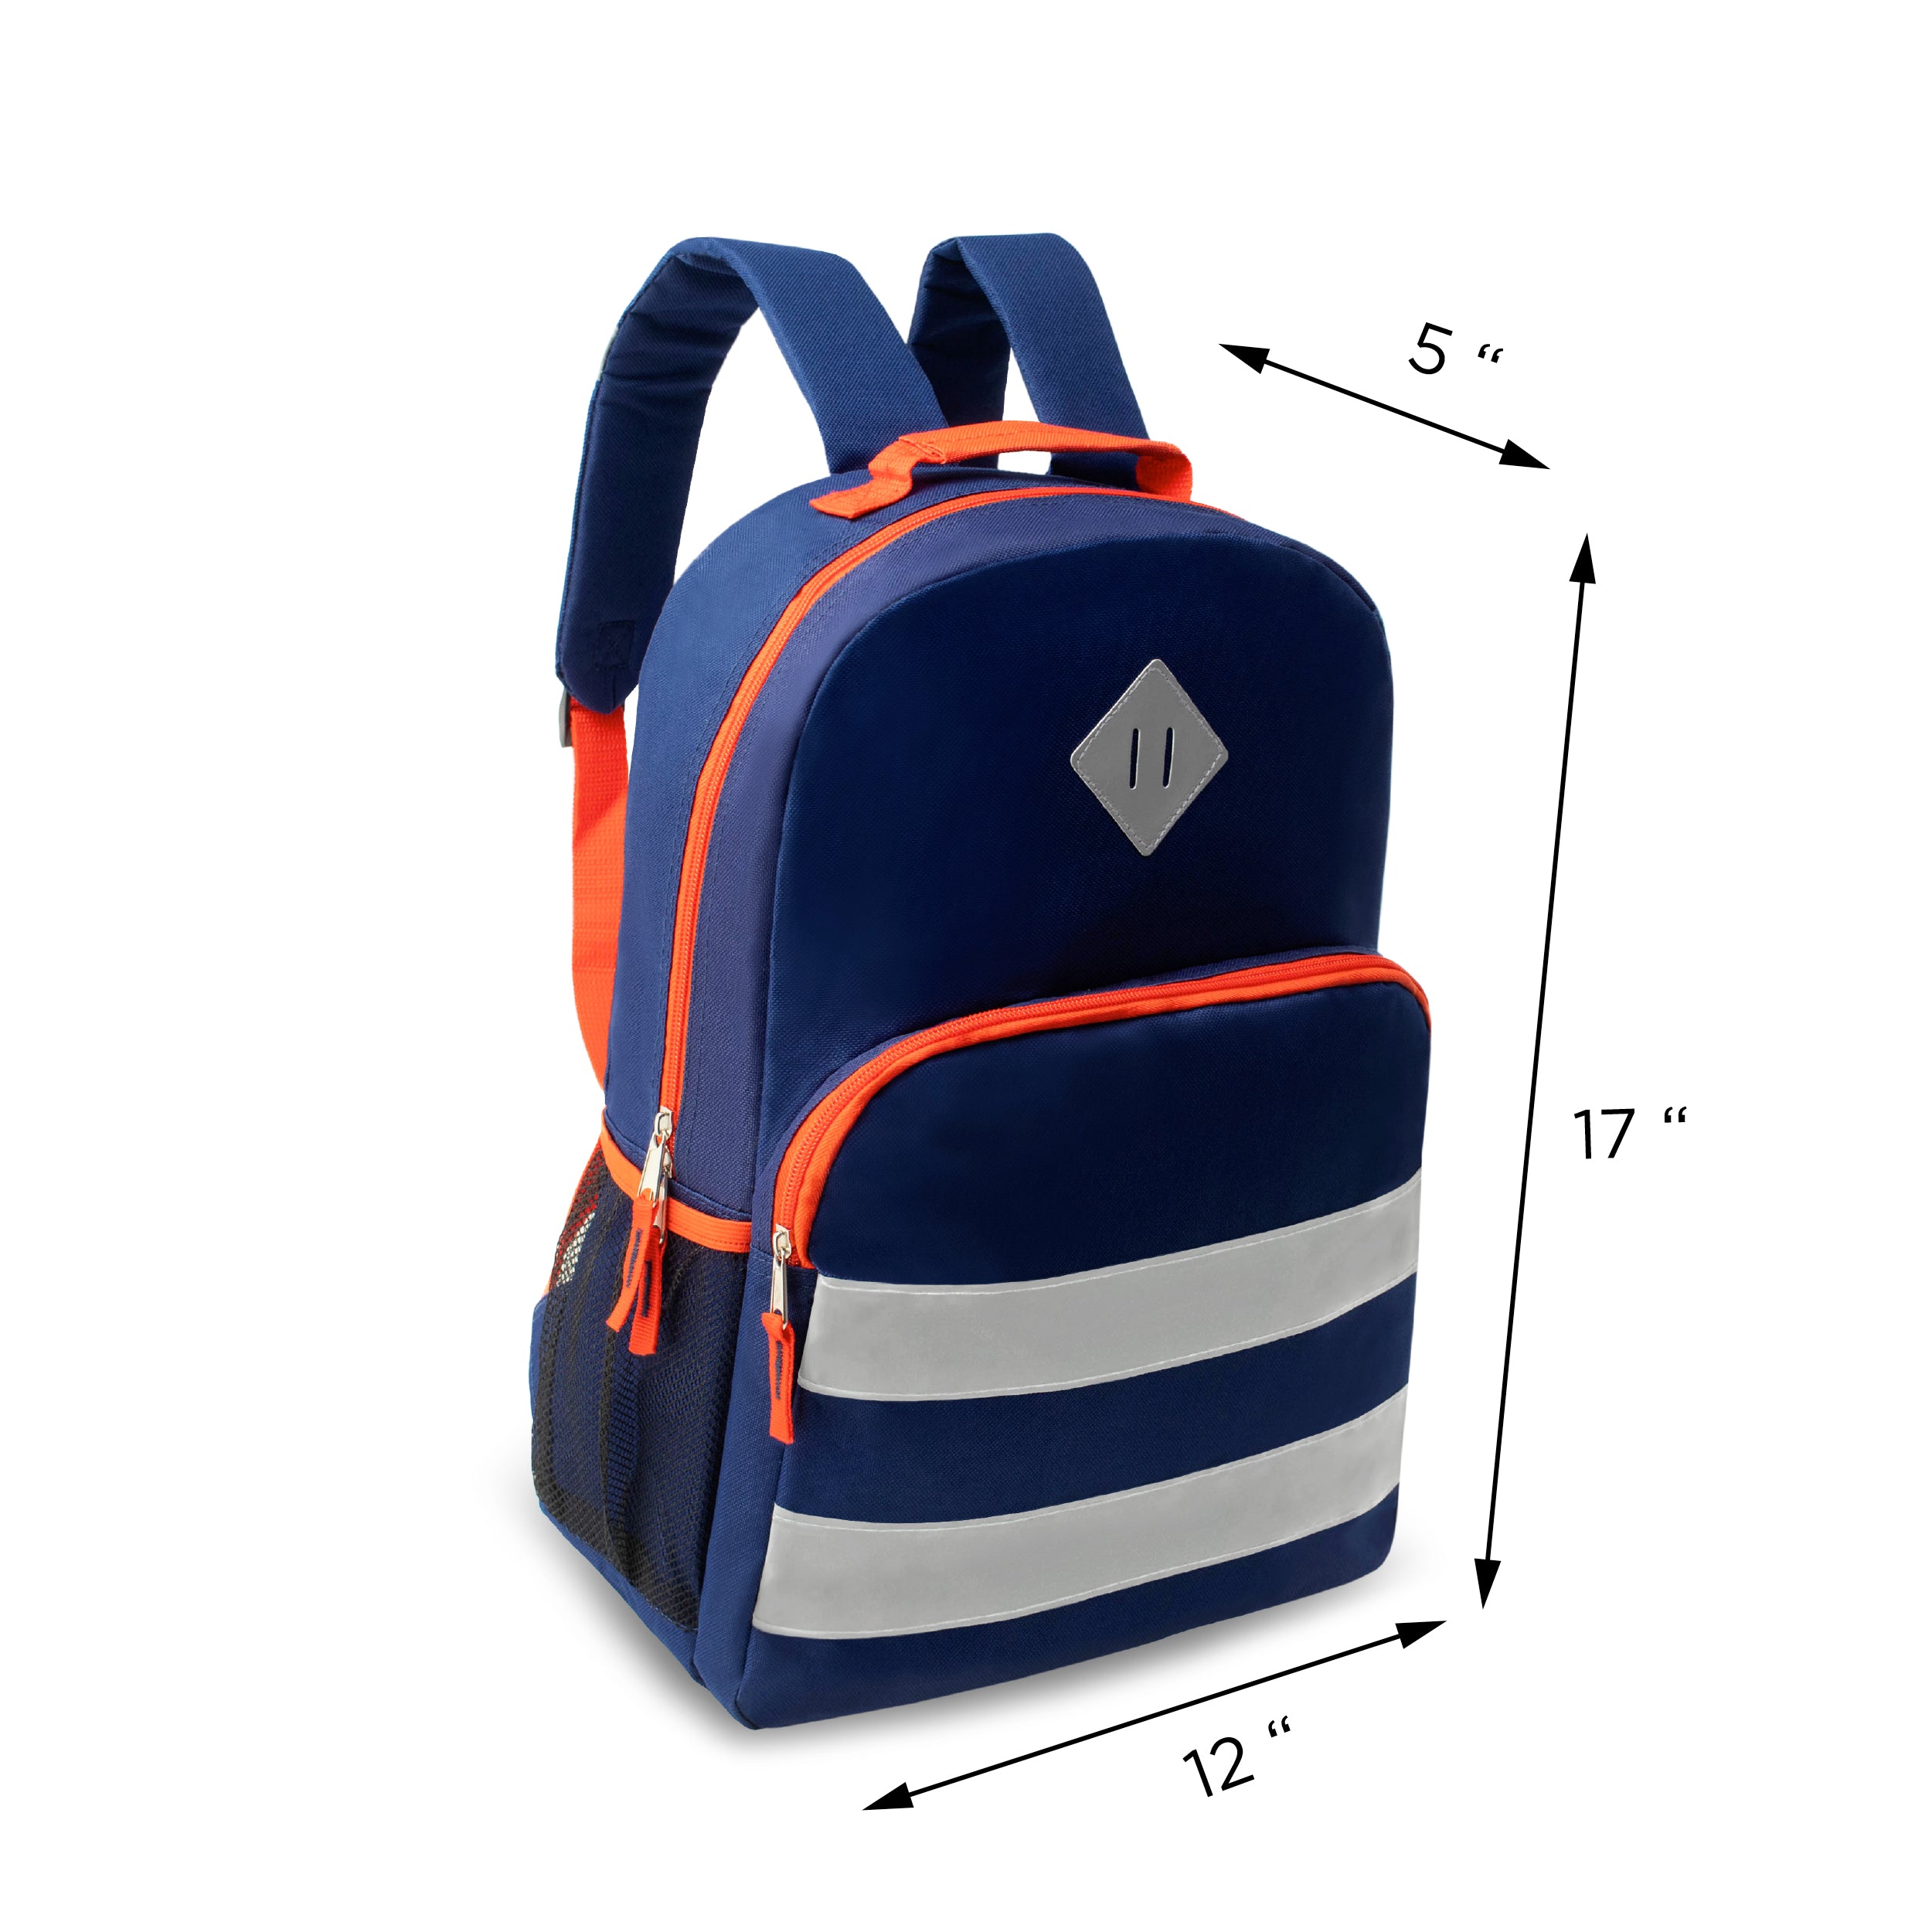 17" Double Reflective Wholesale Backpack in 6 Colors - Bulk Case of 24